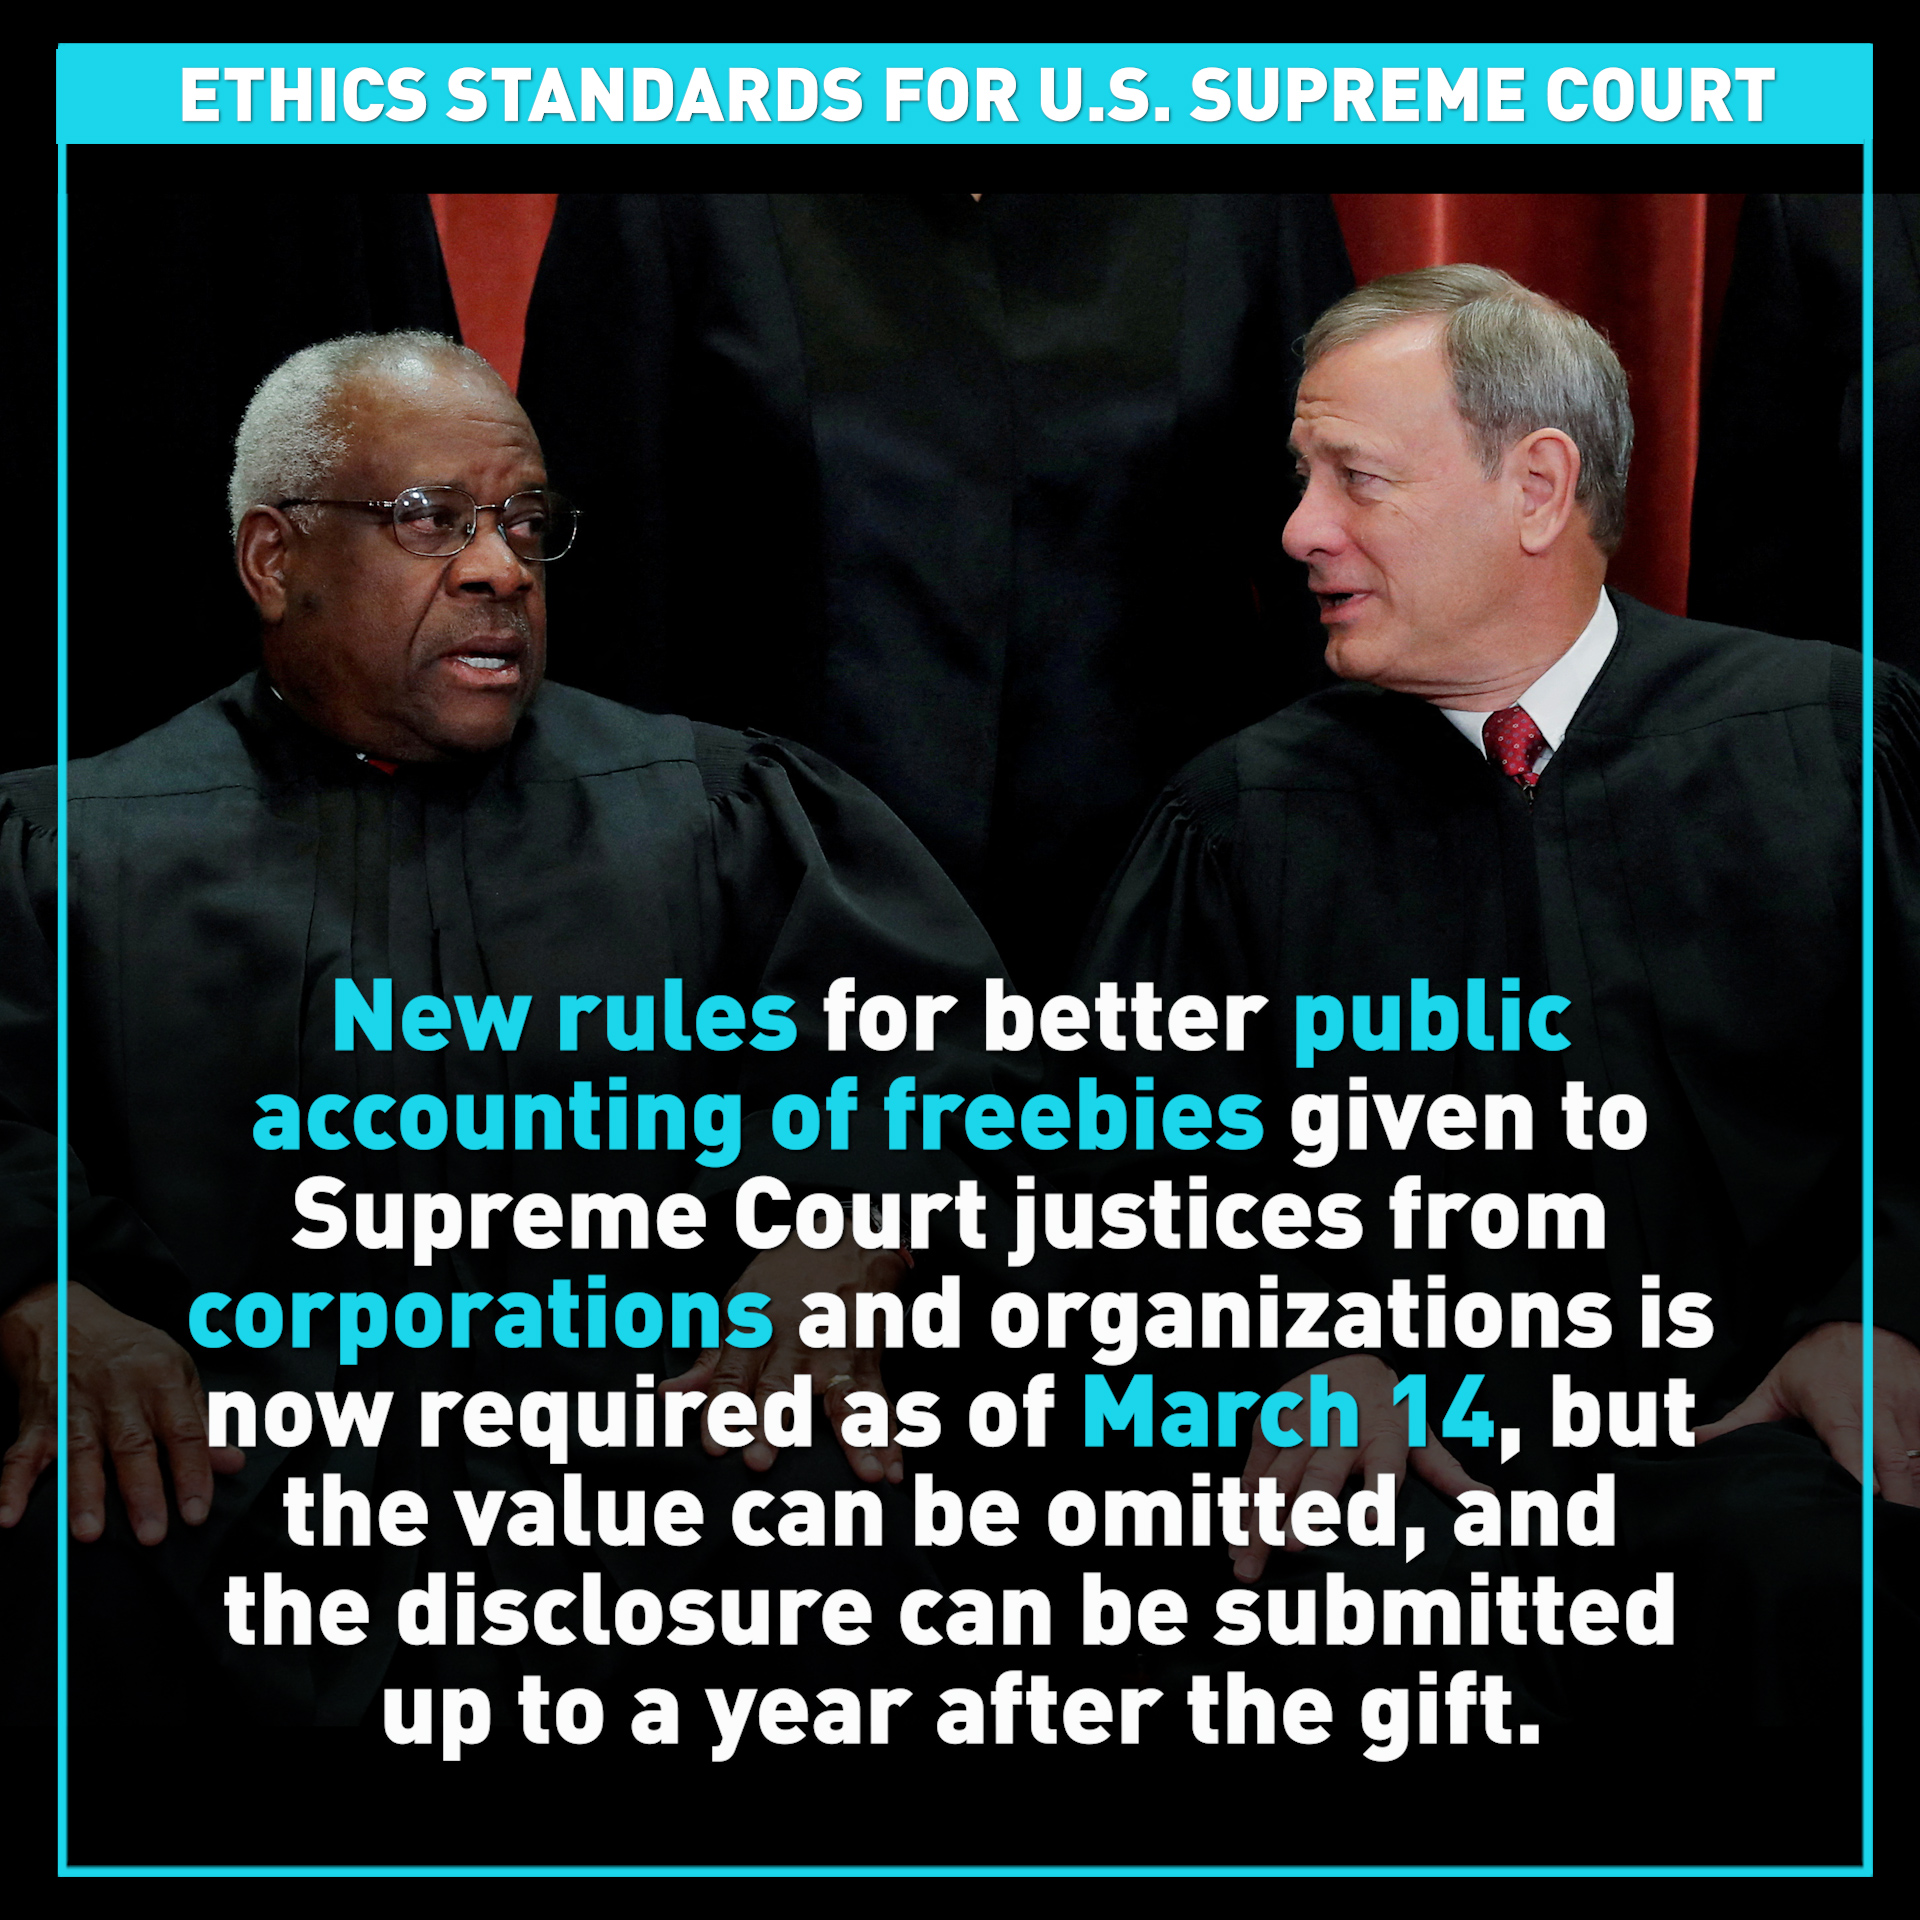 Ethics standards for the U.S. Supreme Court under scrutiny 